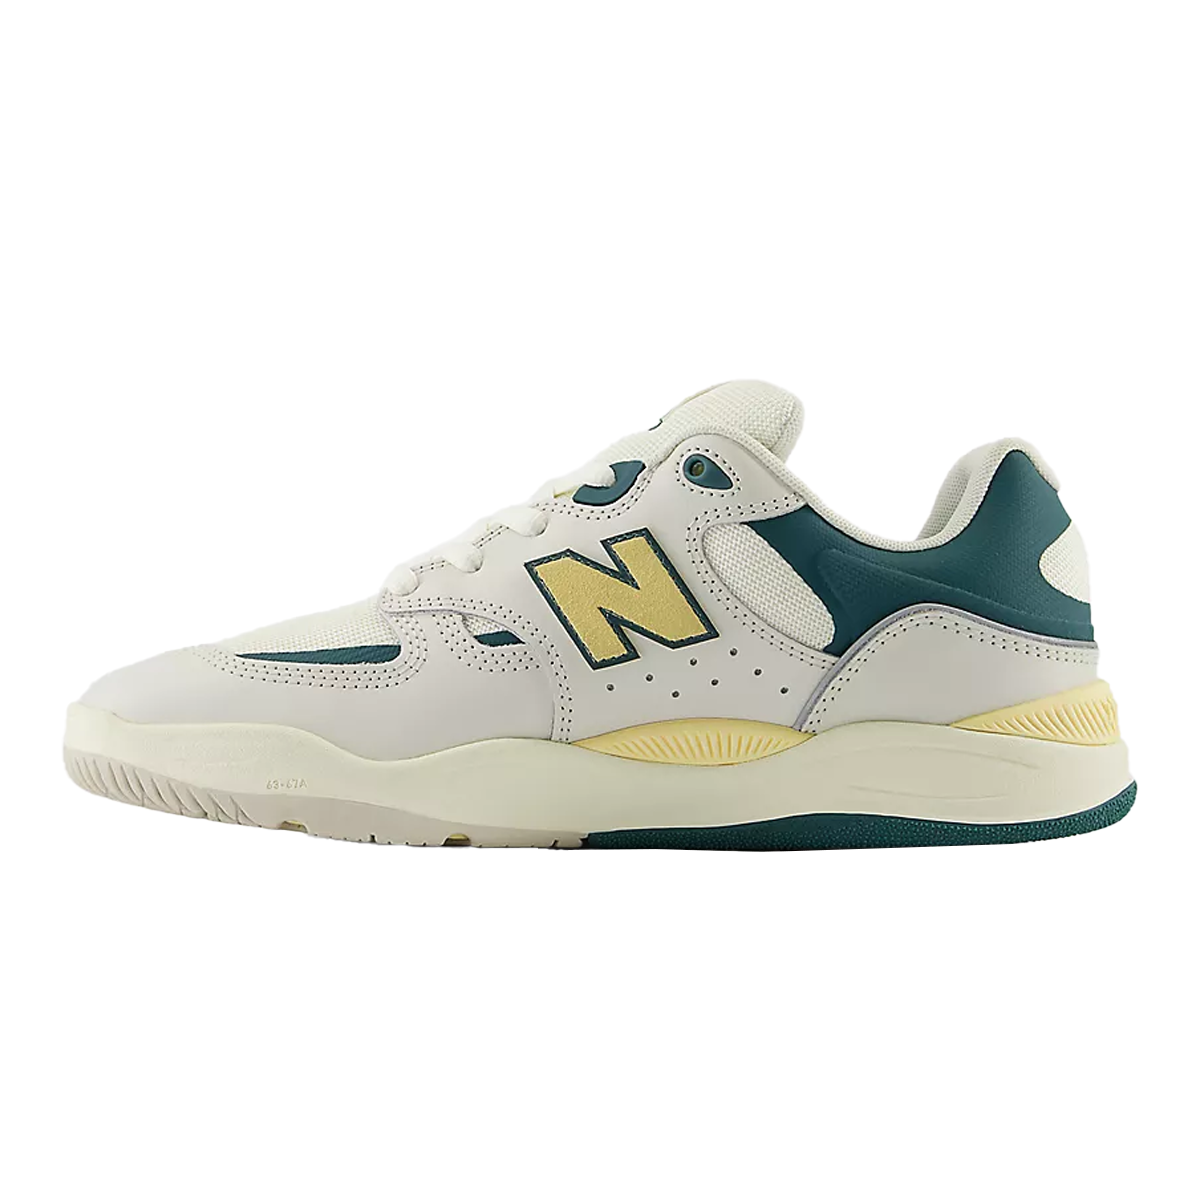 New Balance NM 1010 Shoes - White / New Spruce